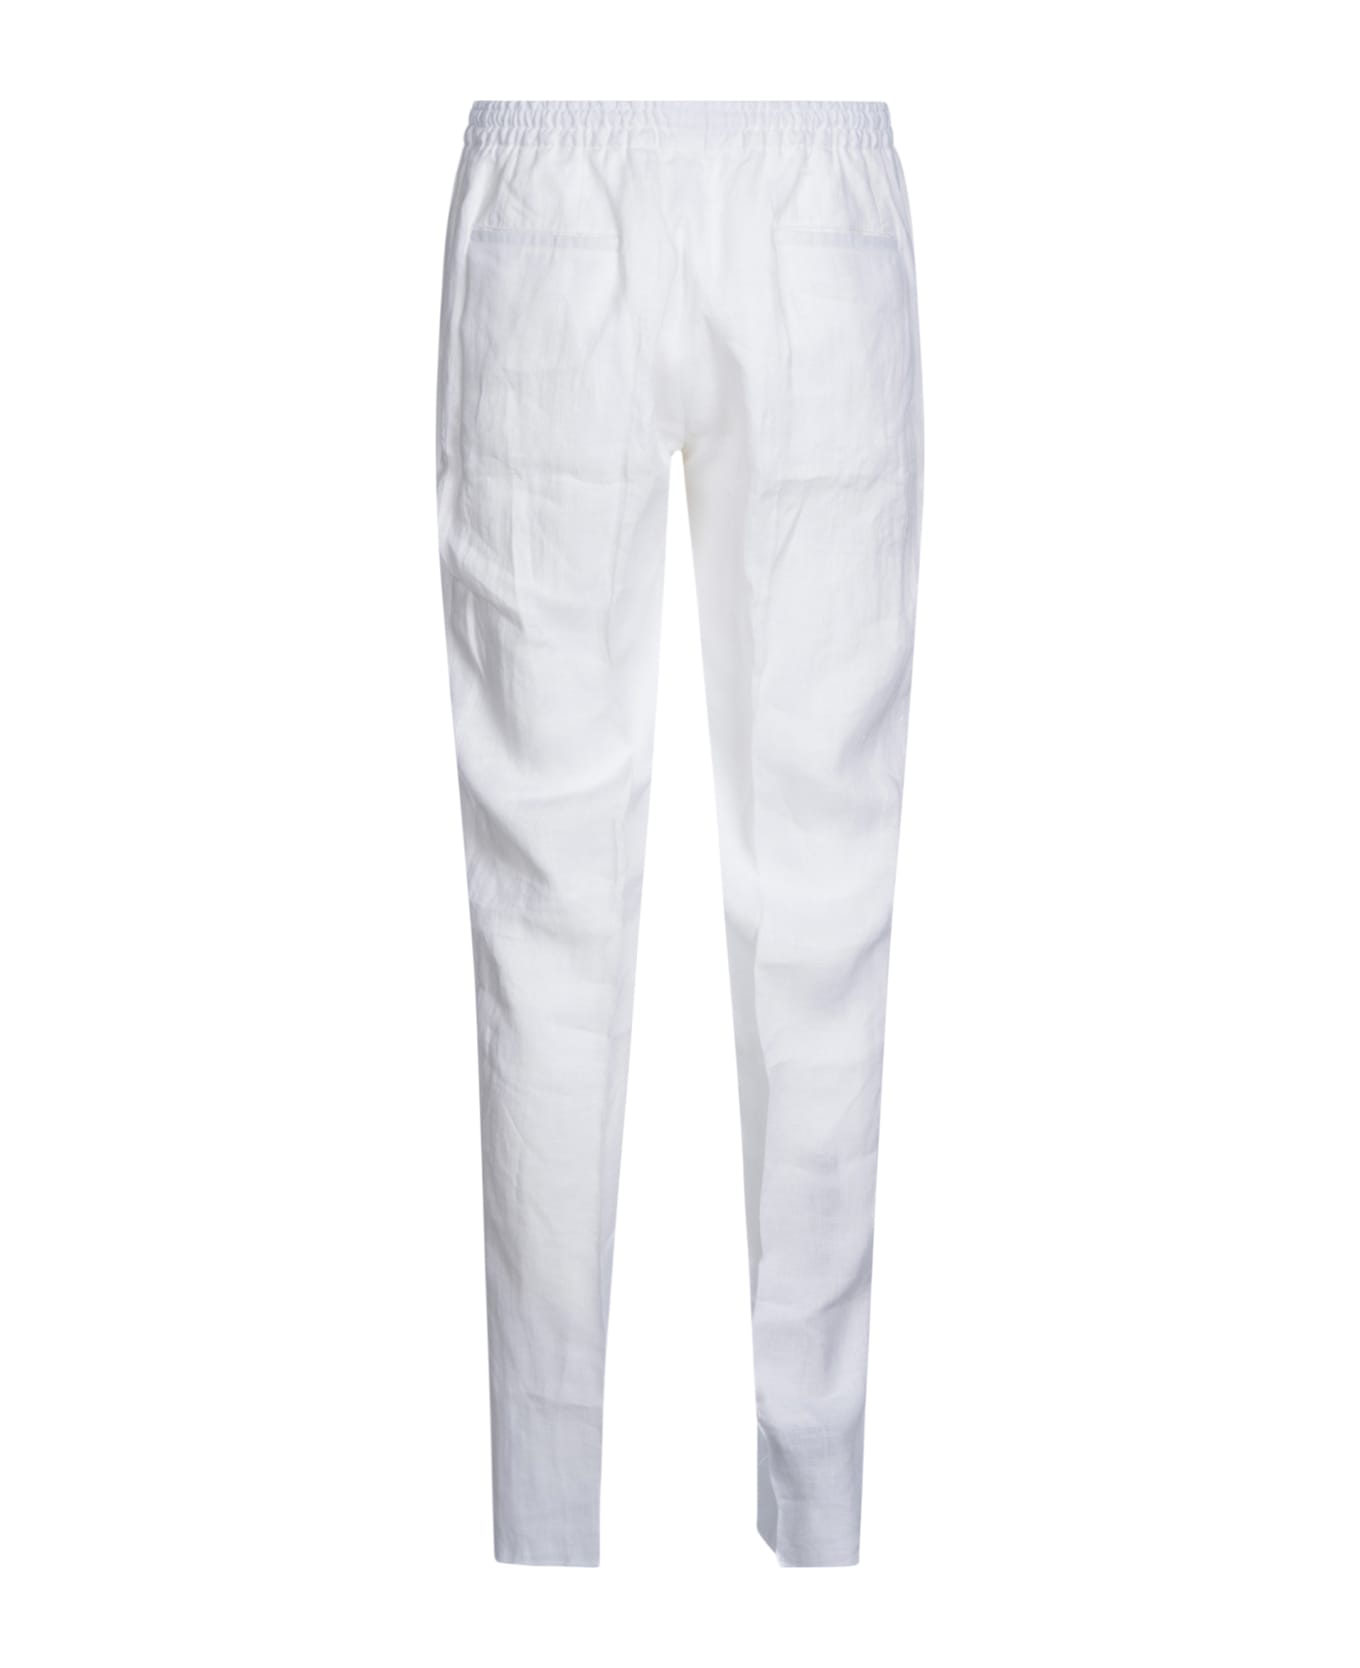 Kiton Ribbed Waist Buttoned Trousers - White